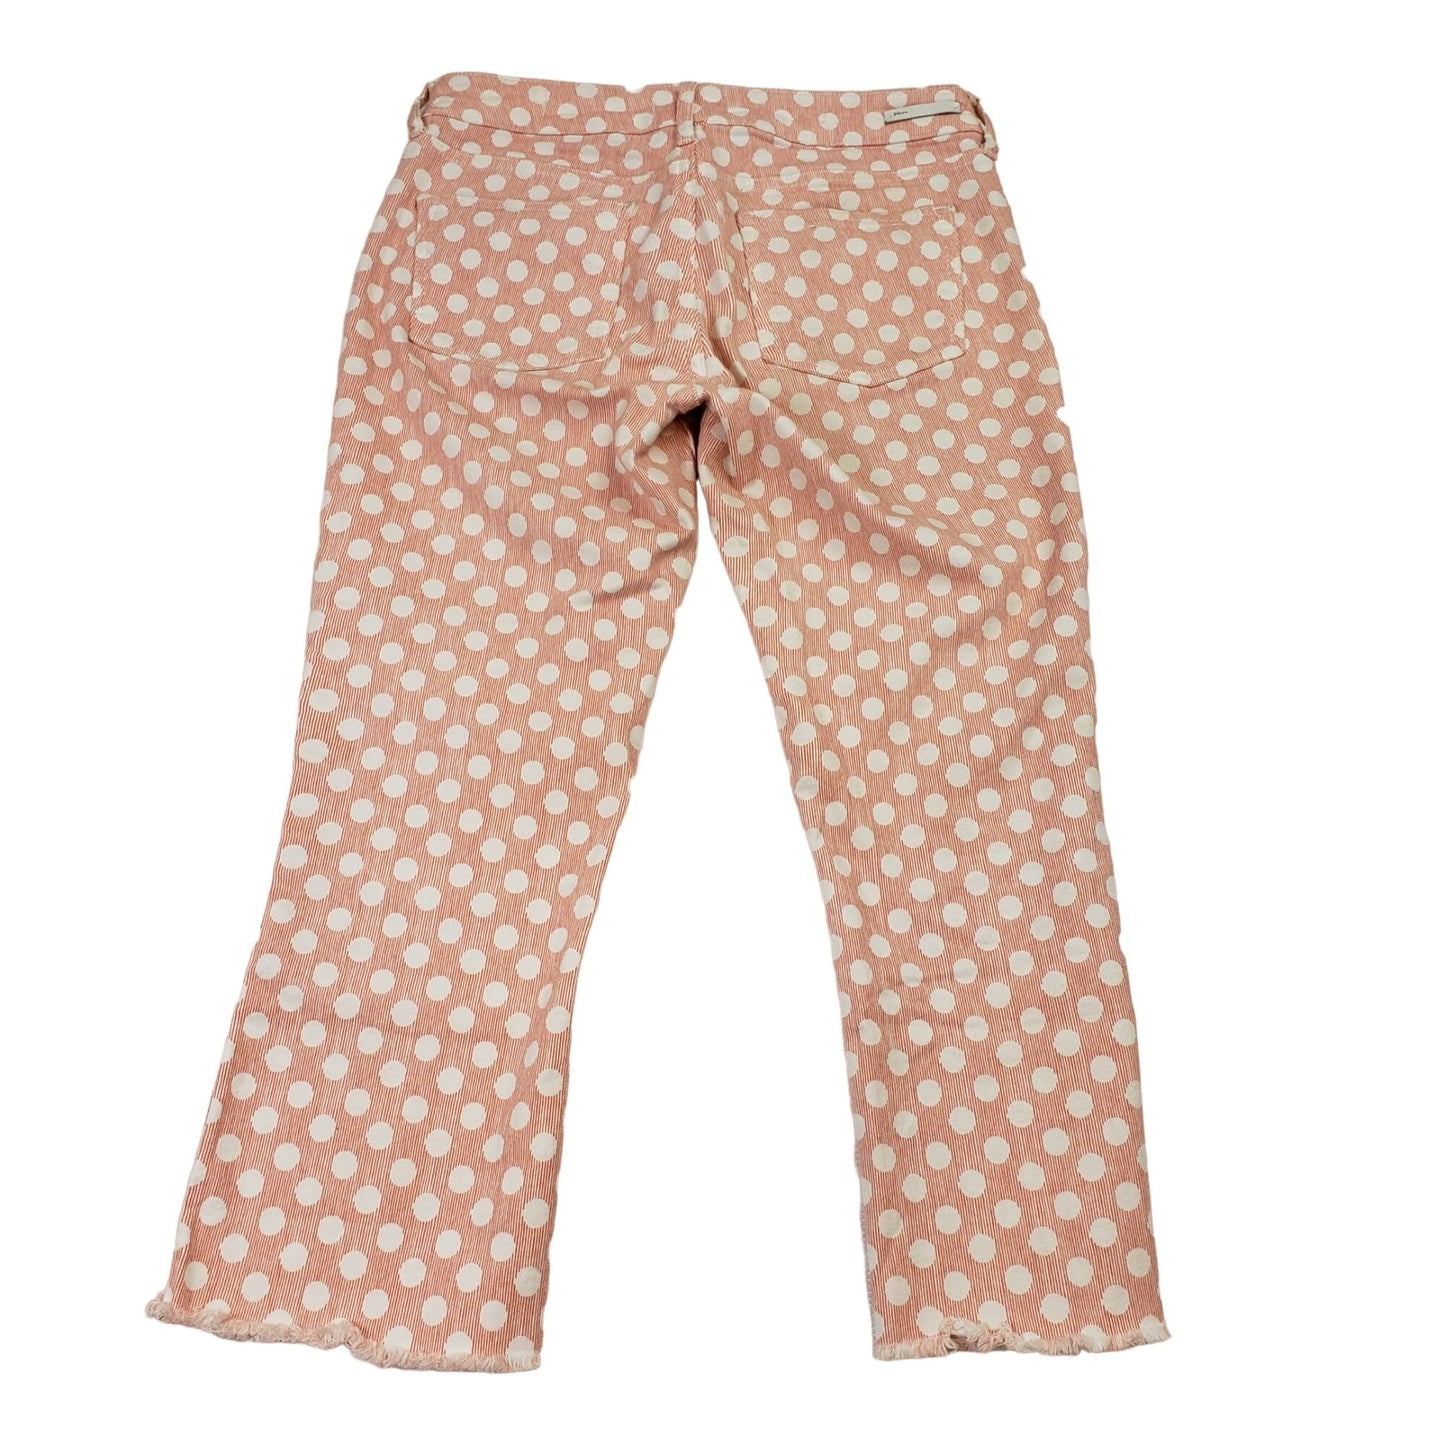 Anthropologie Pilcro and The Letterpress High-Rise Bootcut Polka Dot Jeans Size 28P